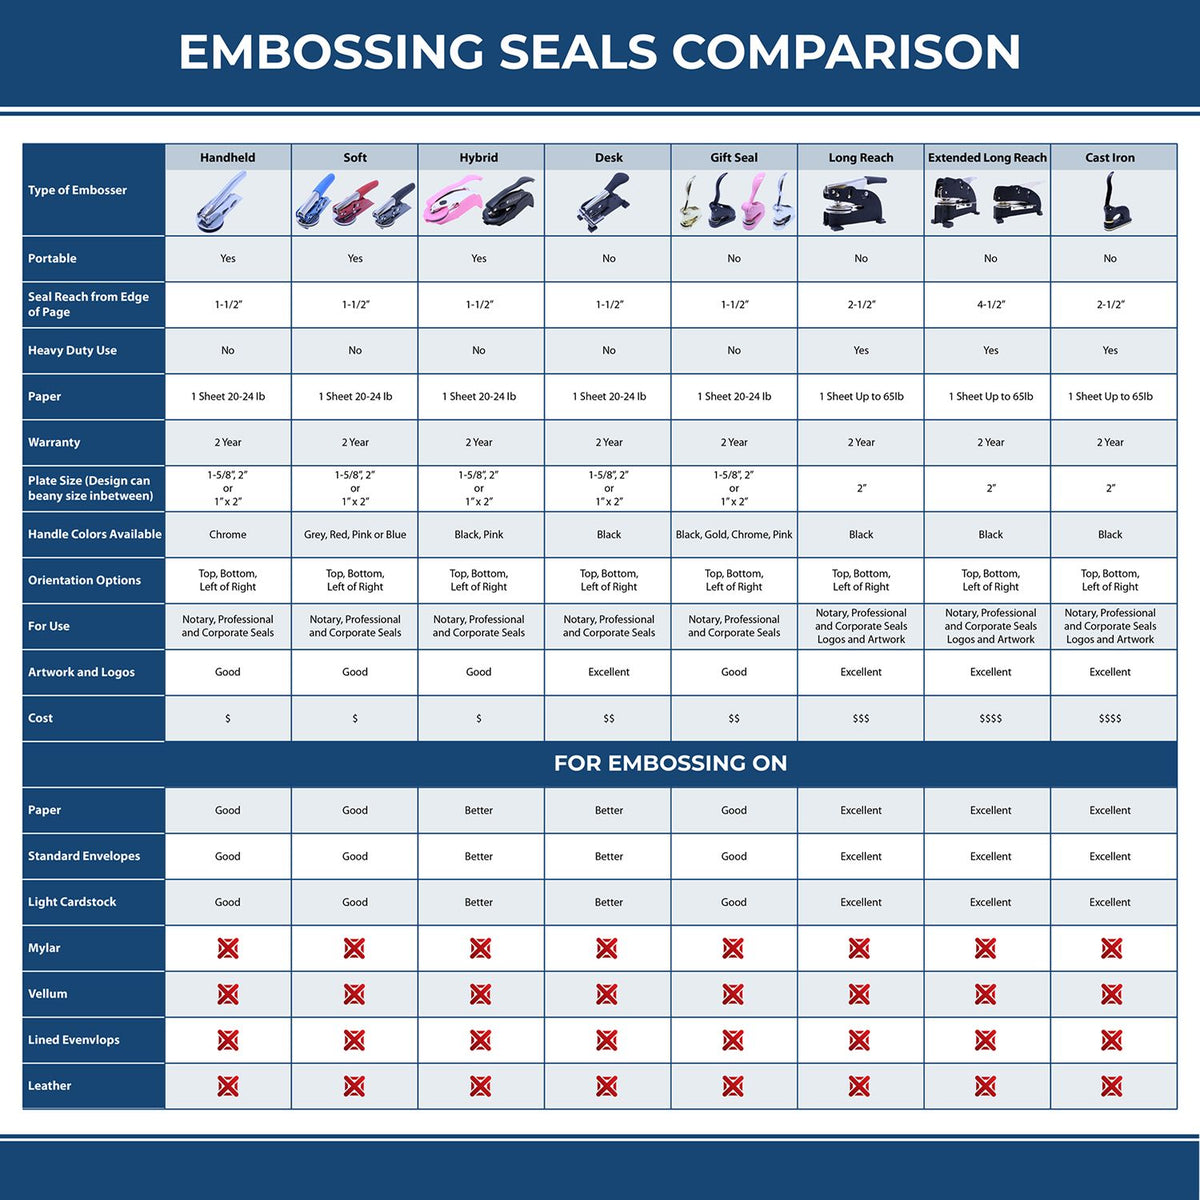 A comparison chart for the different types of mount models available for the Soft Pocket Georgia Landscape Architect Embosser.